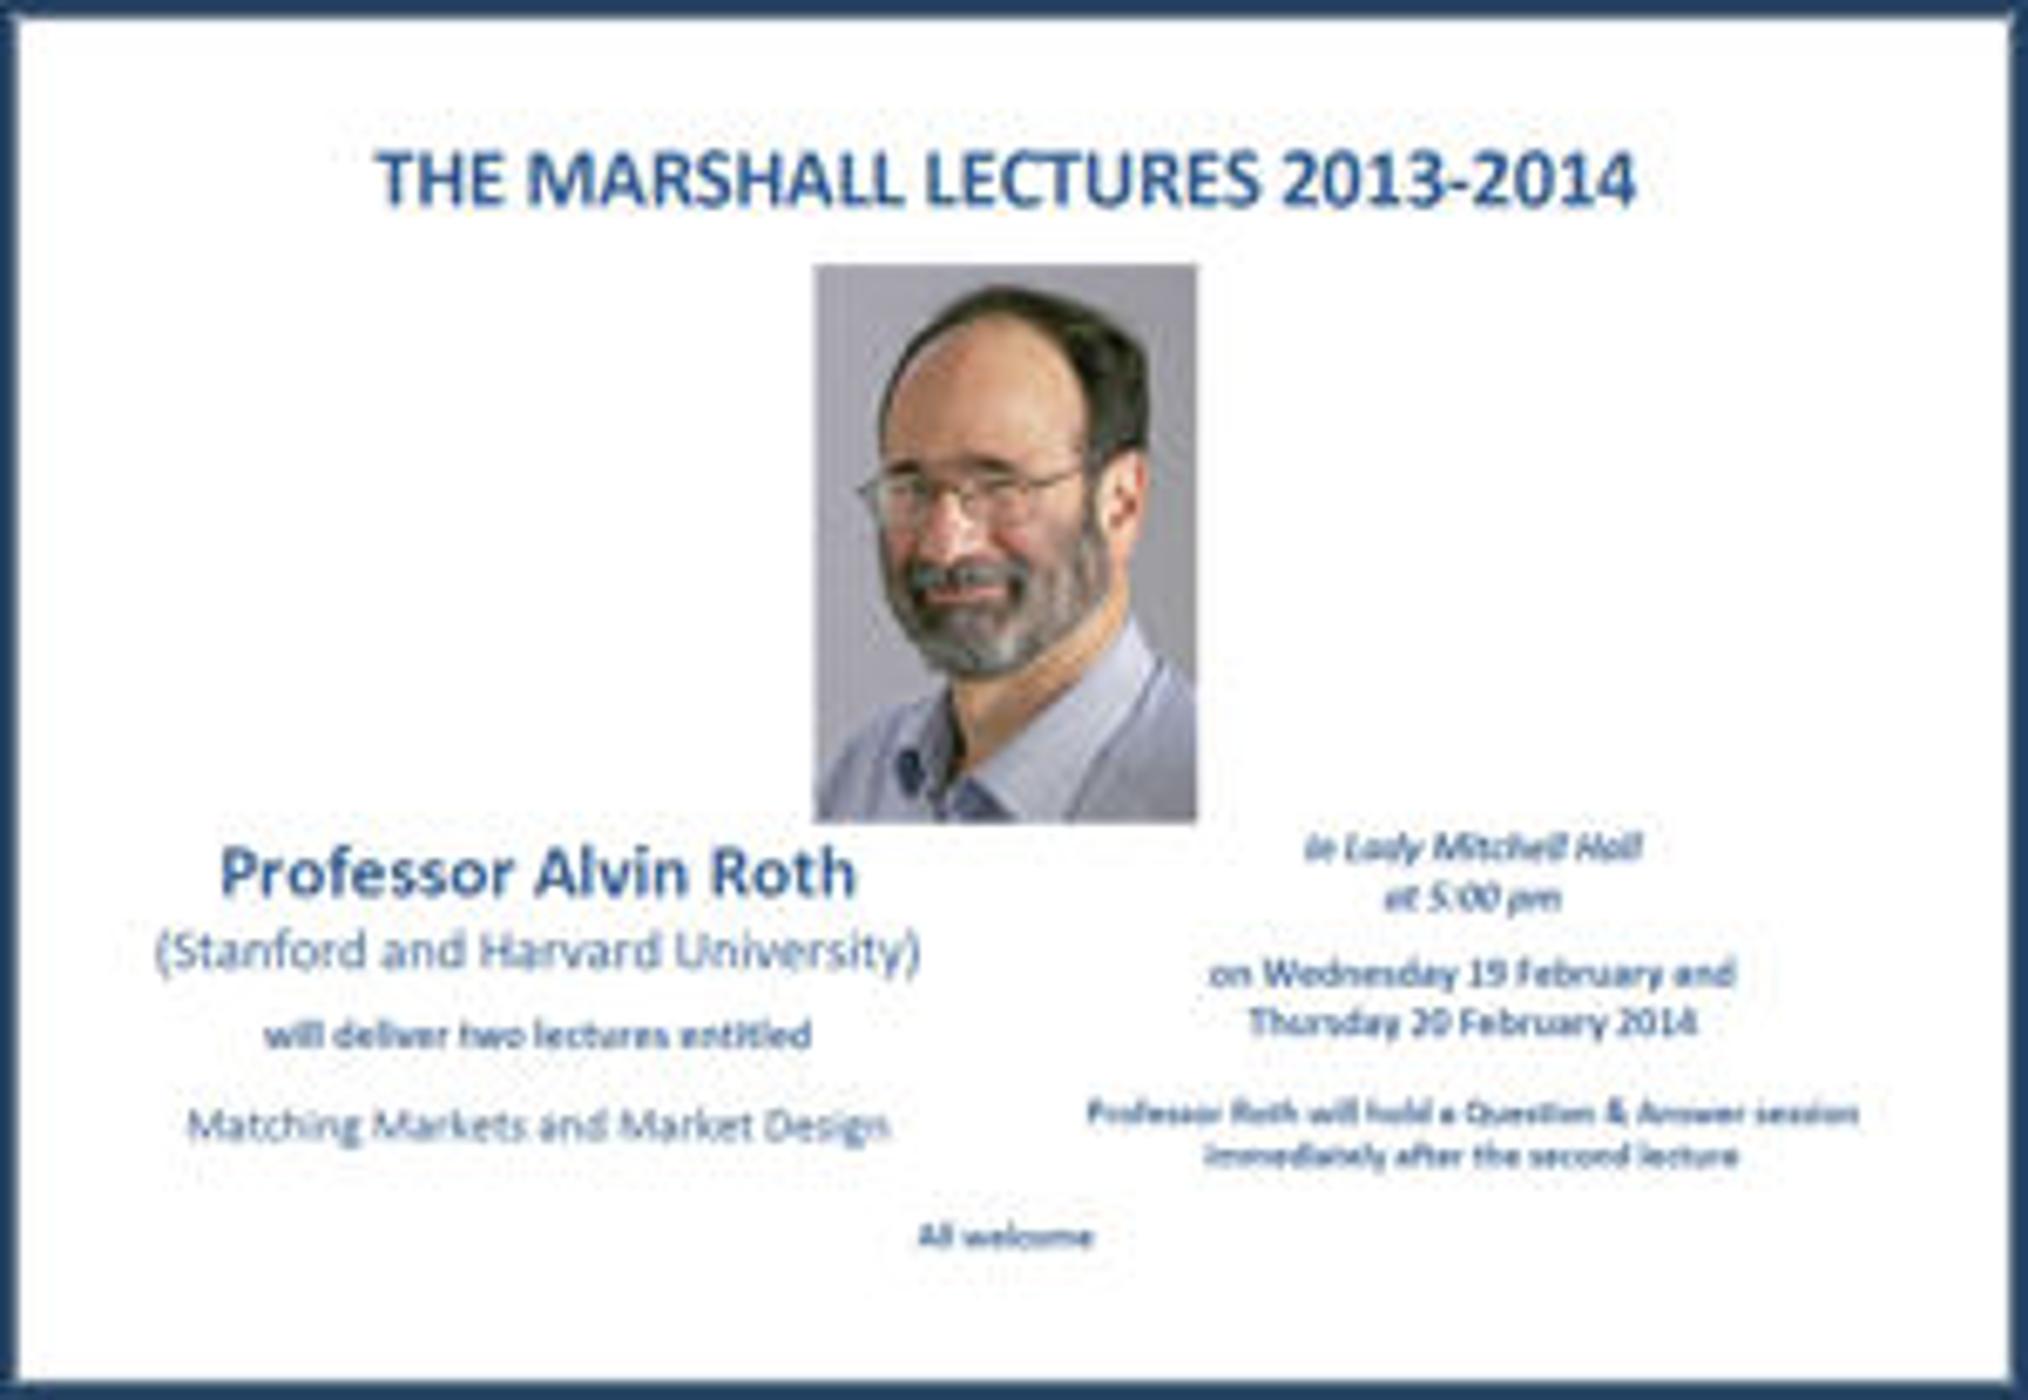 Marshall Lecture 2013-2014 Professor Alvin Roth - Matching Markets and Market Design - Lecture 2